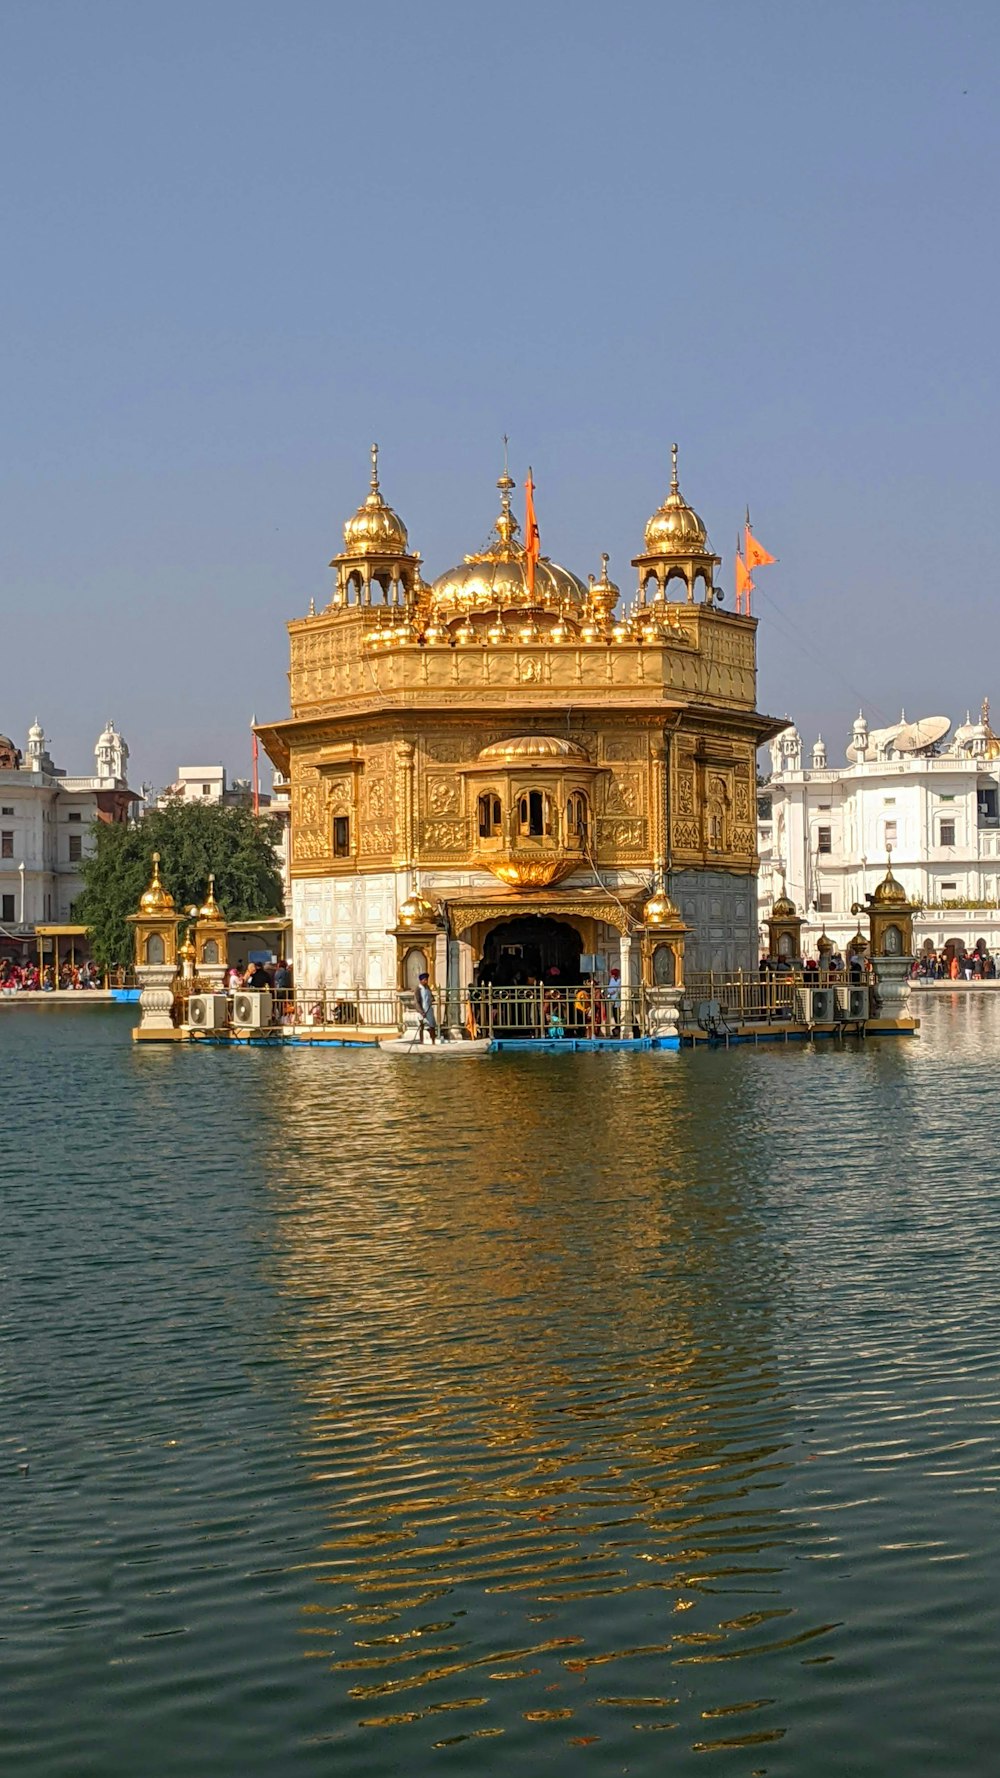 Harmandir Sahib with a gold roof and a gold domed roof surrounded by water